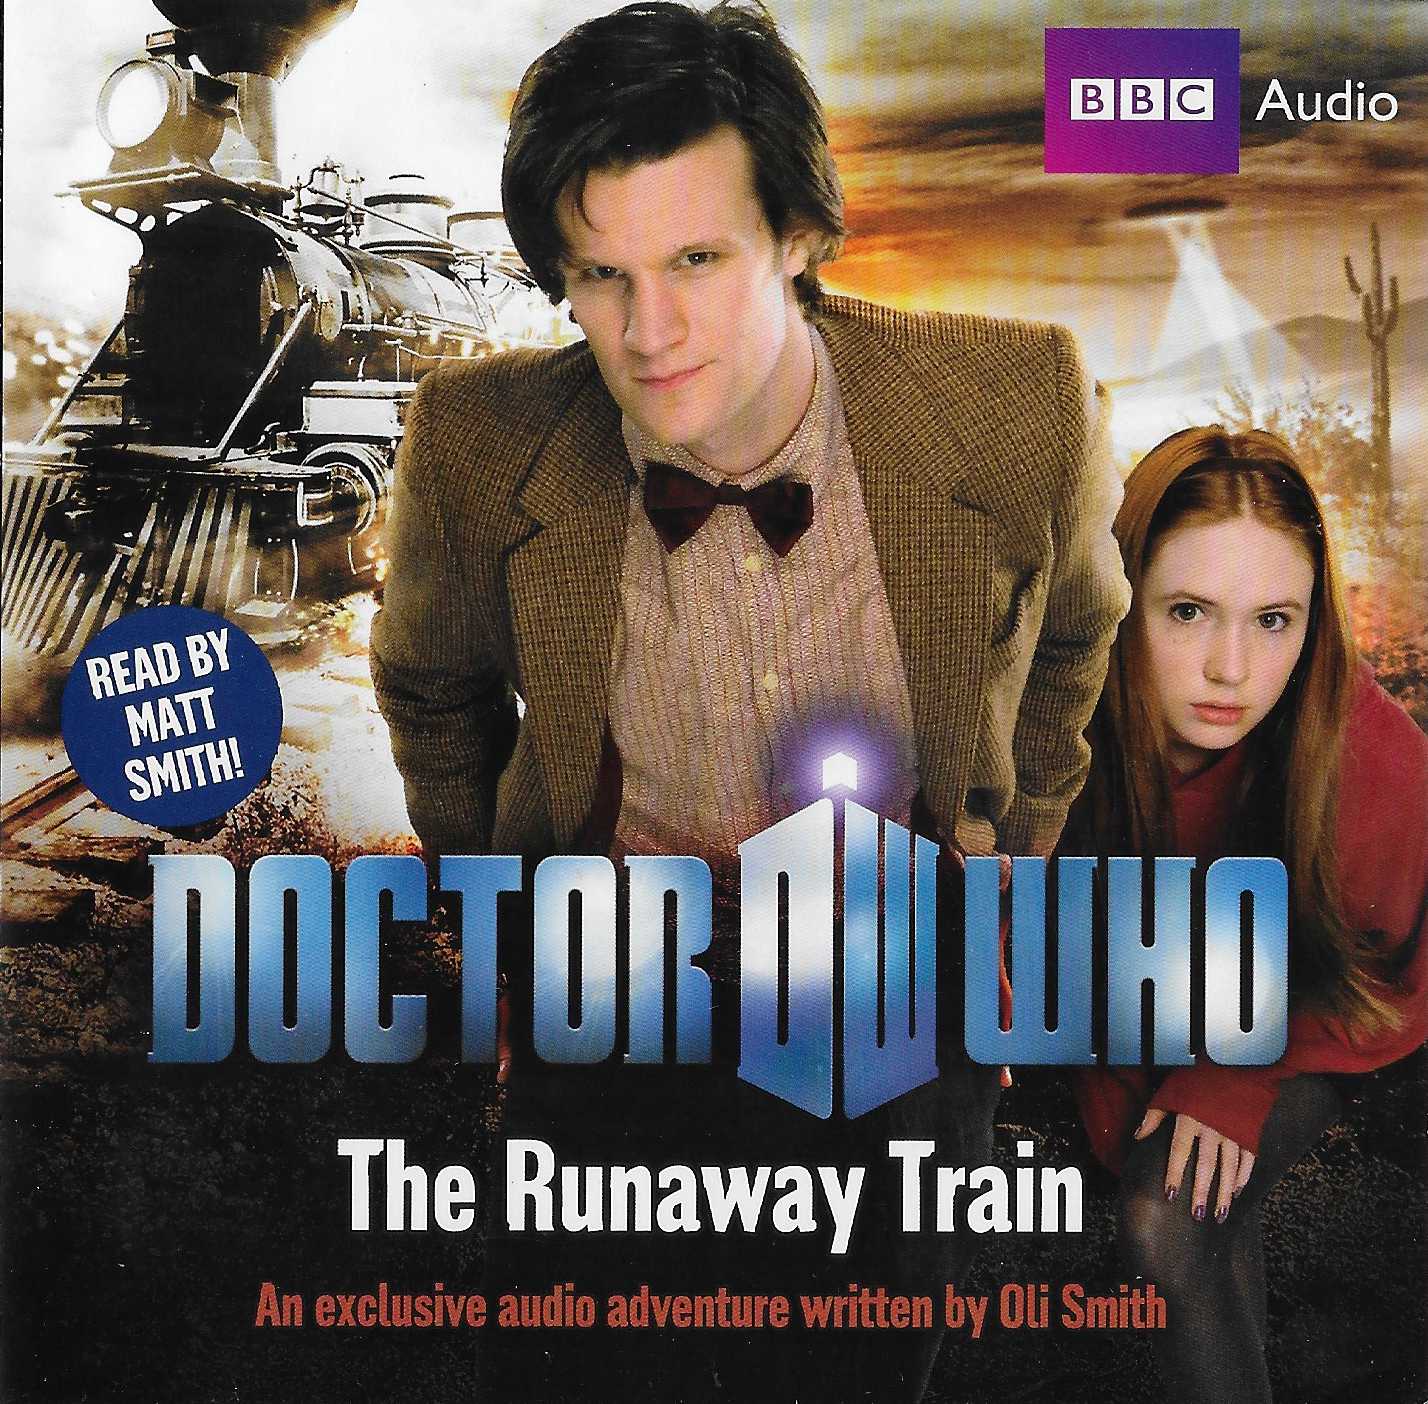 Picture of ISBN 978-1-408-42747-7 Doctor Who - The runaway train by artist Oli Smith from the BBC records and Tapes library